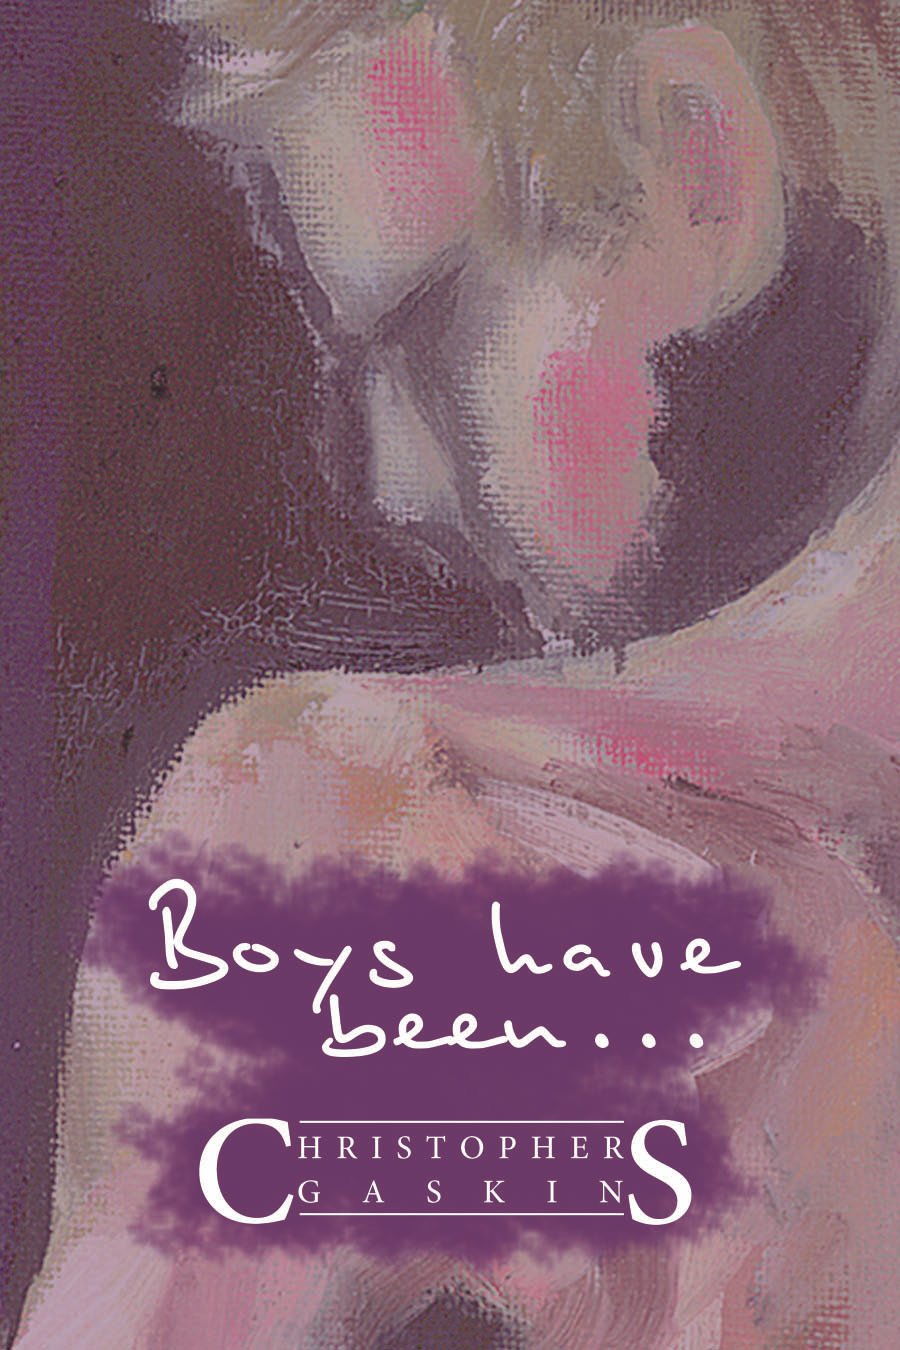 Boys have been . . . by Christopher Gaskins